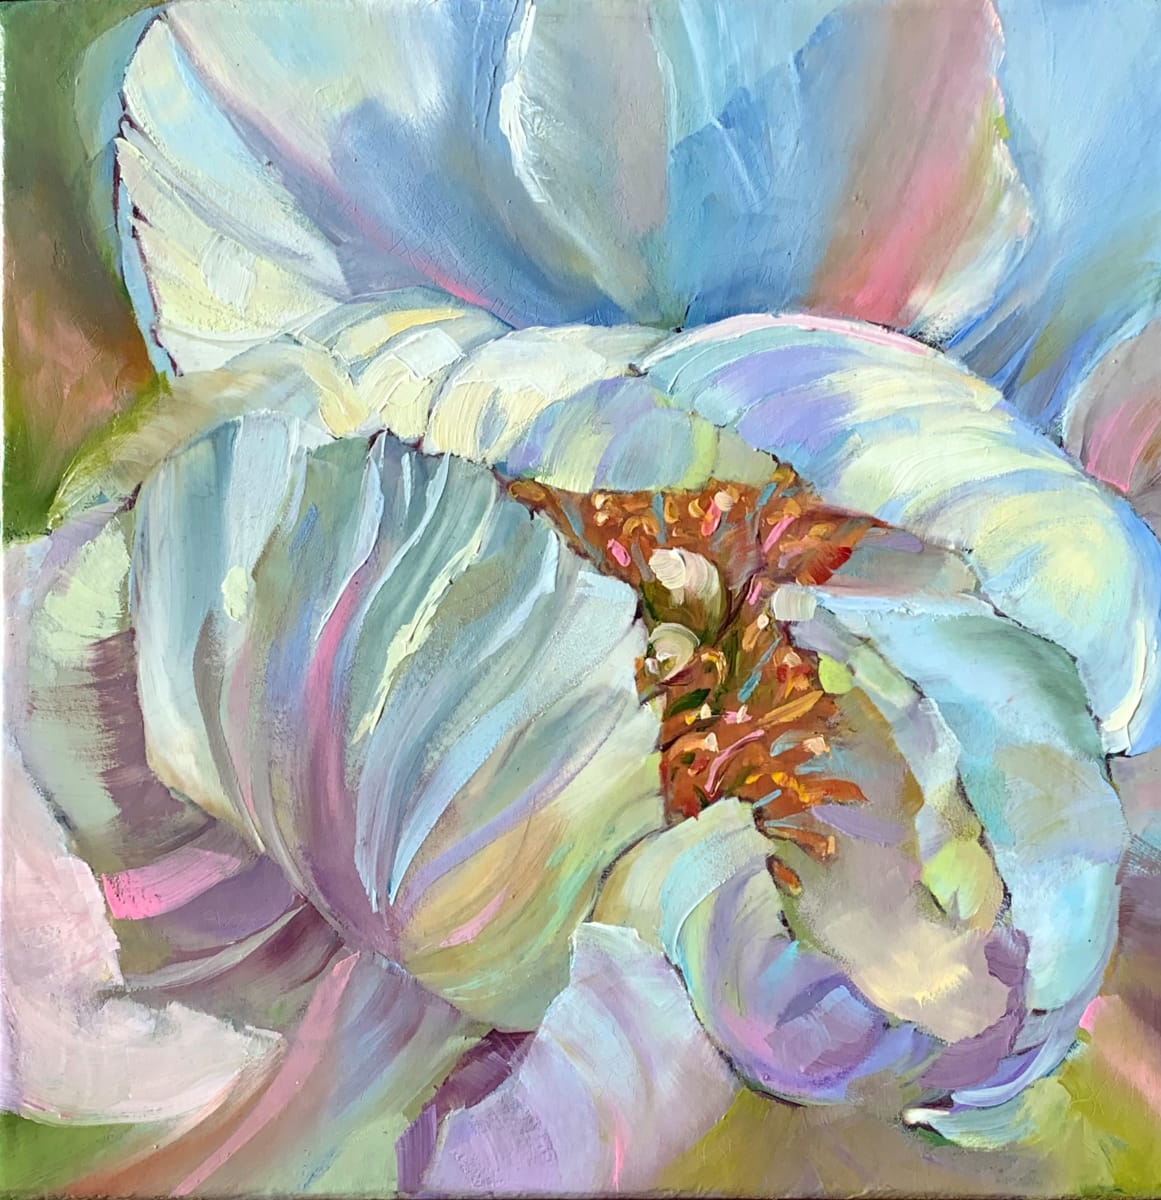 Shy Peony by Pat Cross  Image: Updated Image
